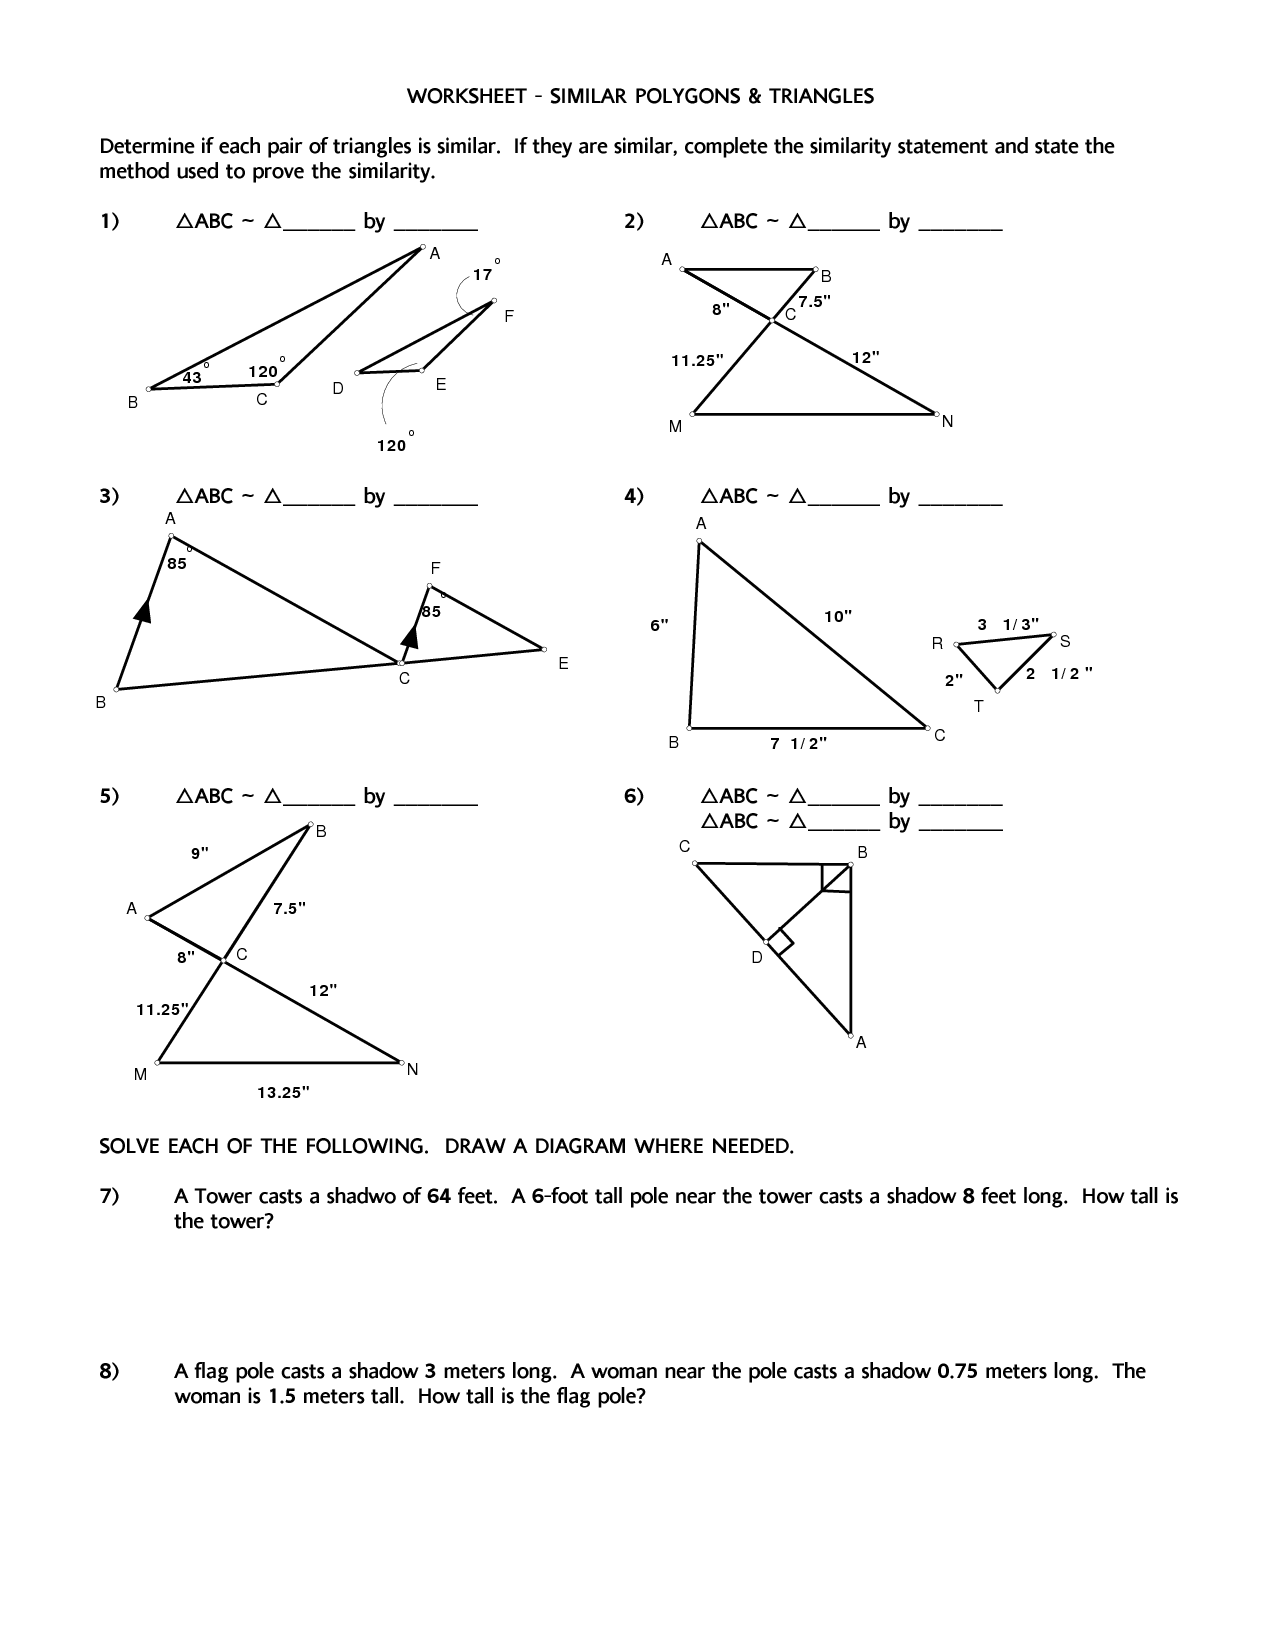 8-best-images-of-similar-polygons-worksheet-and-answers-similar-triangles-and-polygons